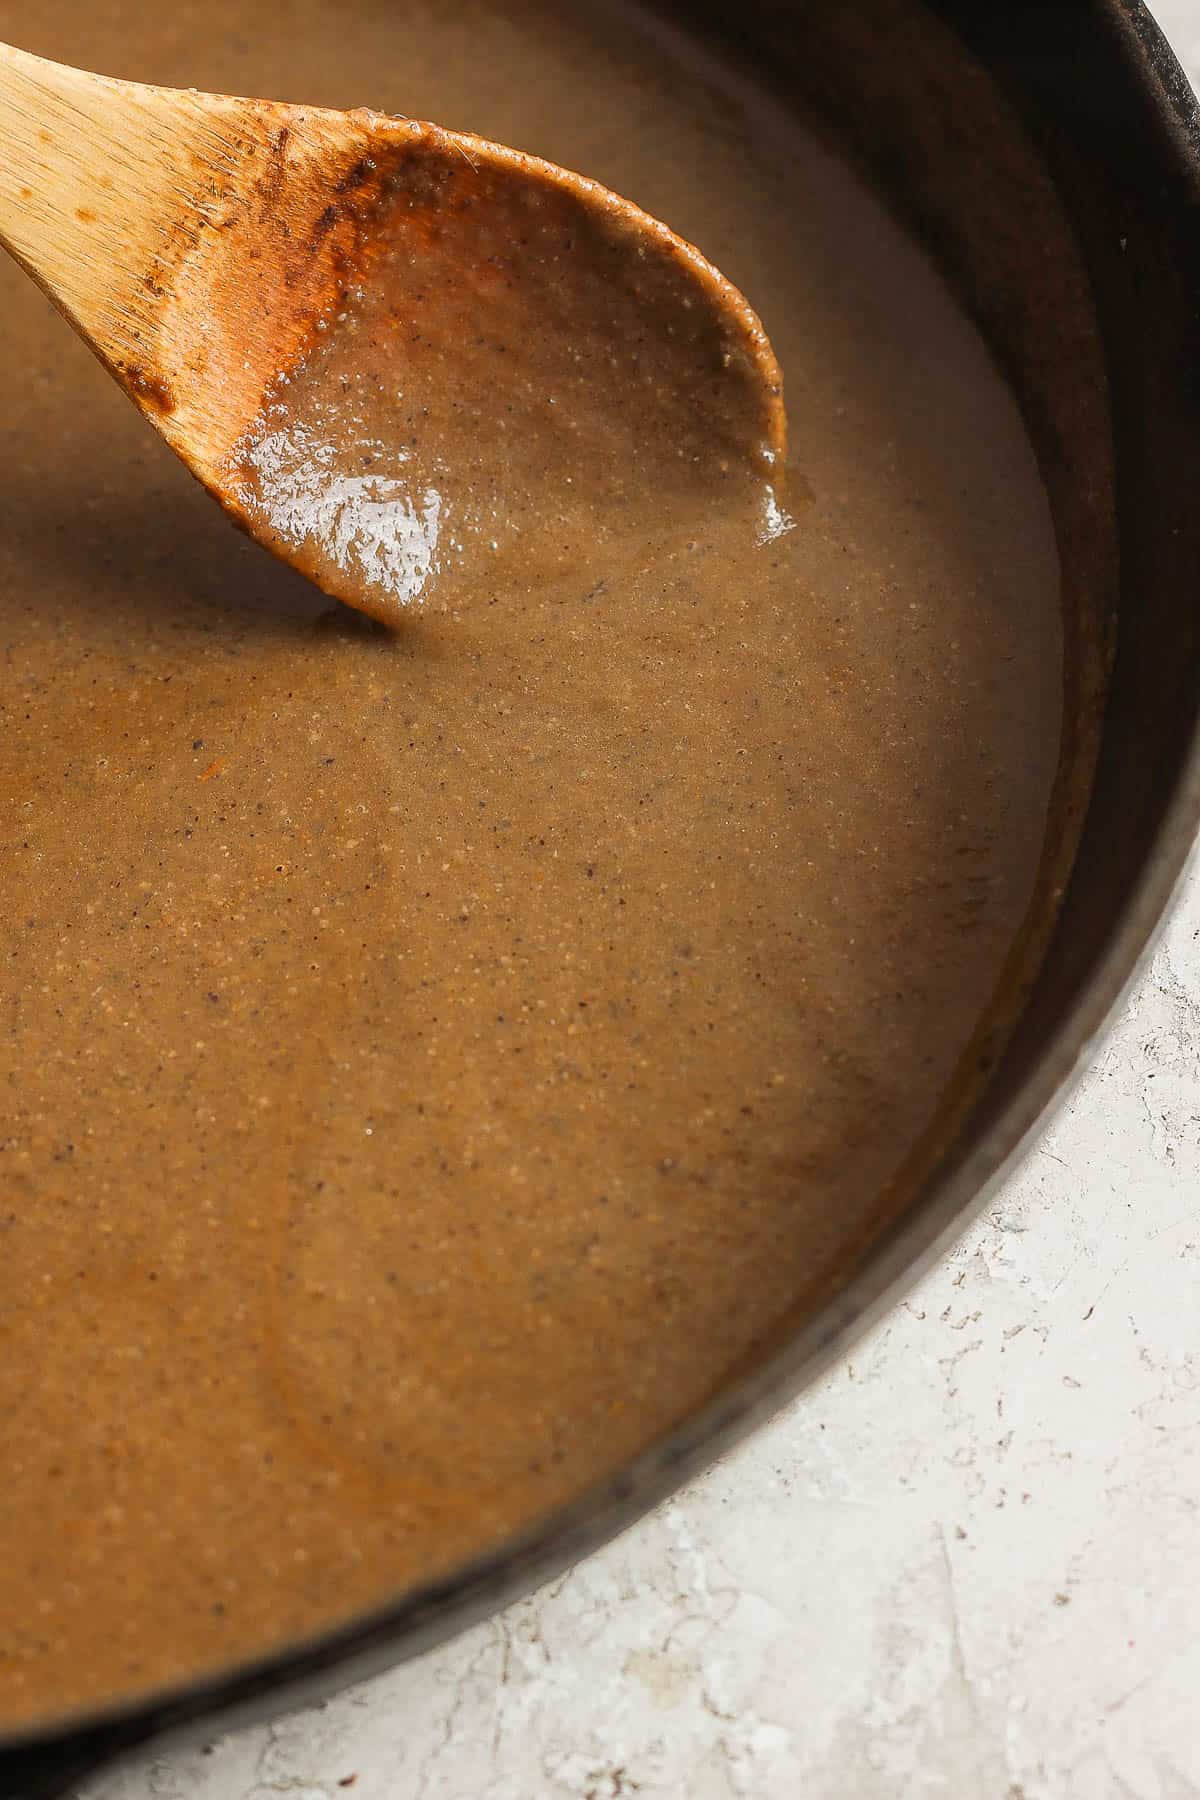 Mole sauce in the pan with a wooden spoon.